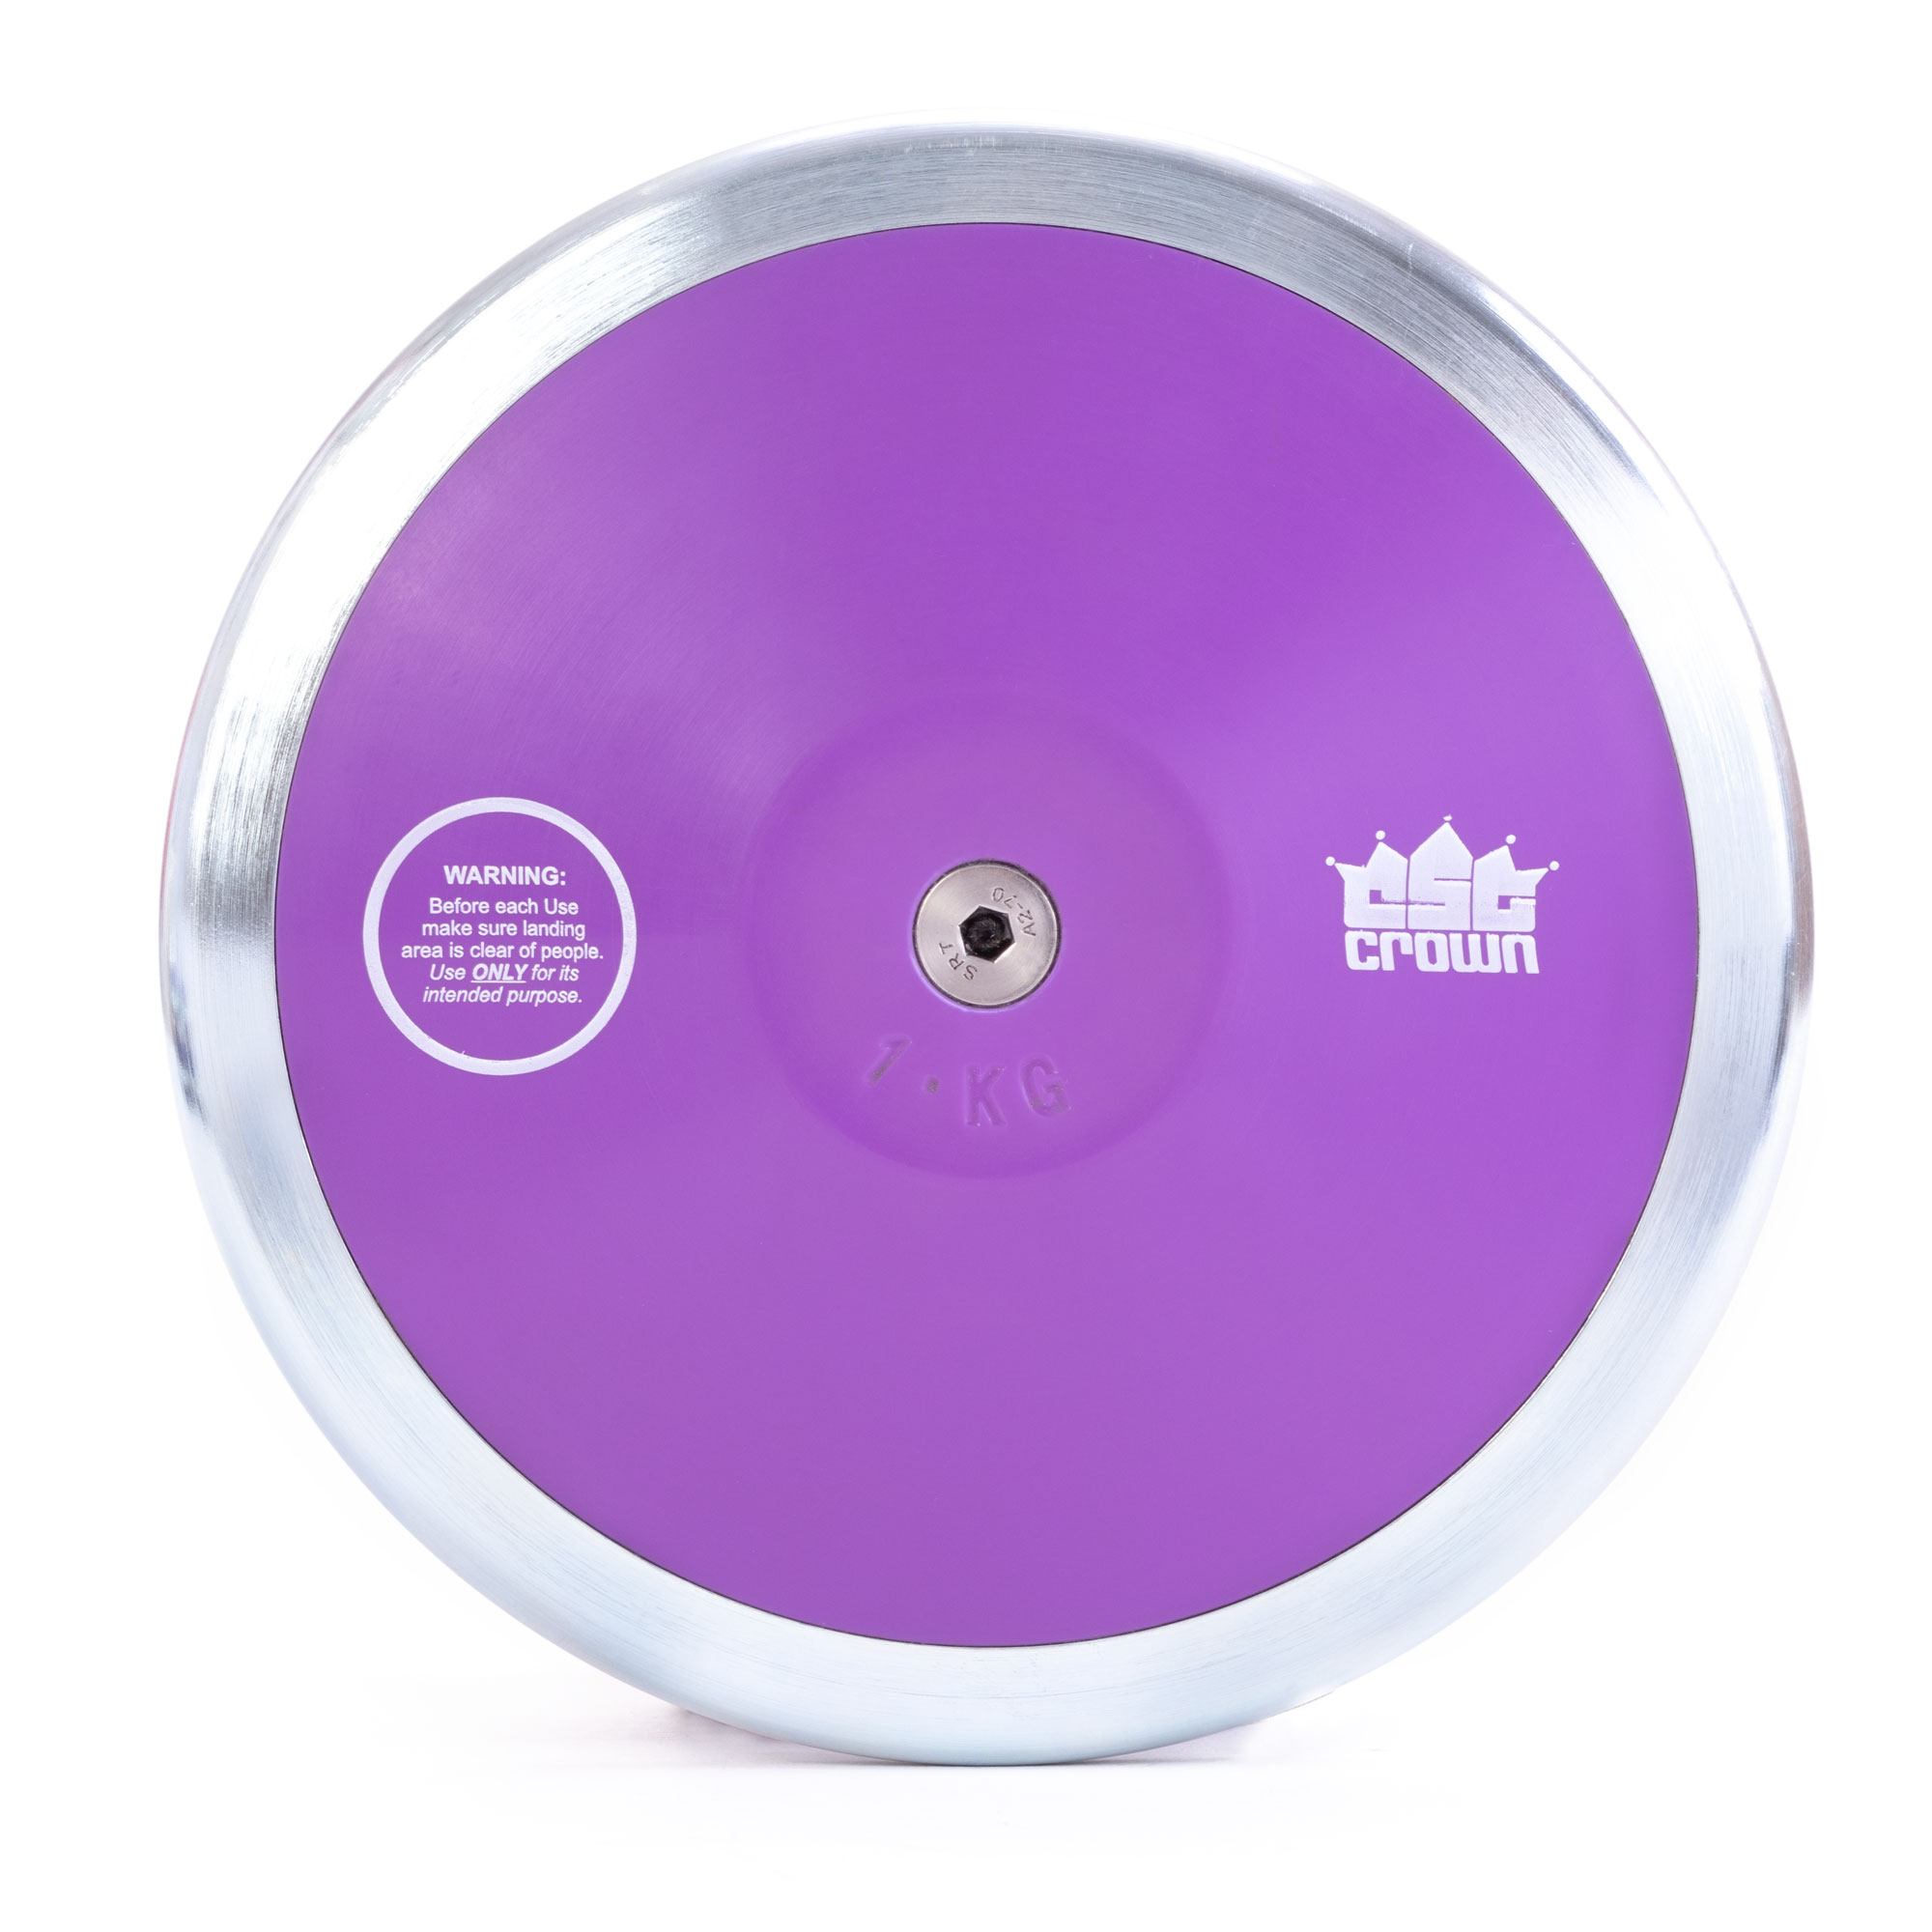 High Spin Discus, 80% Rim Weight, 1kg